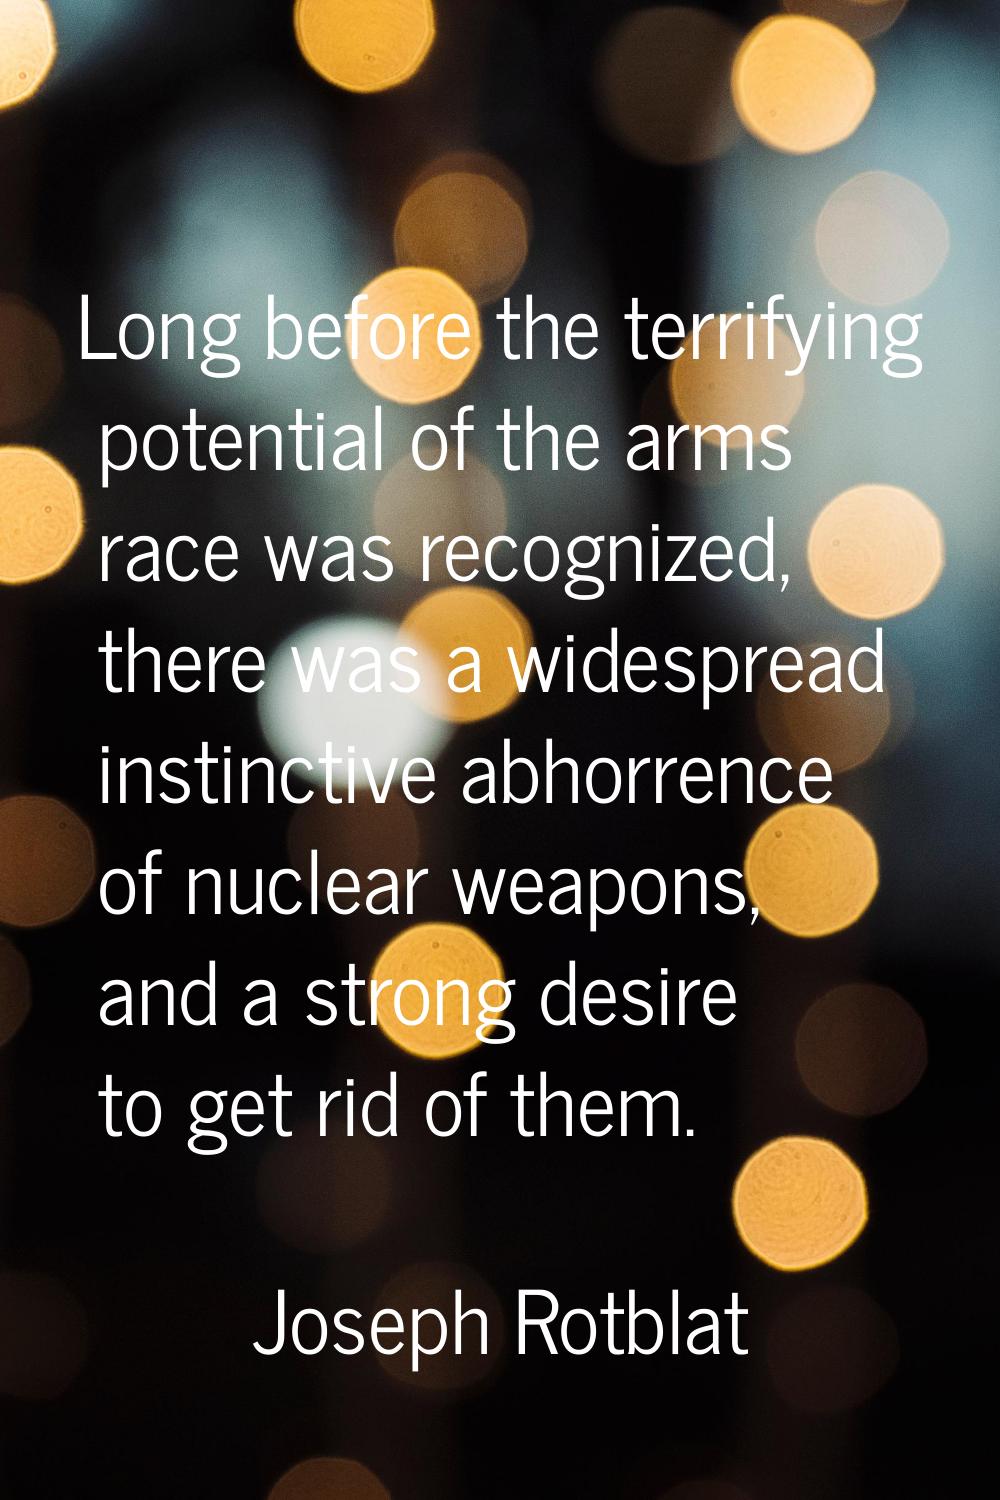 Long before the terrifying potential of the arms race was recognized, there was a widespread instin